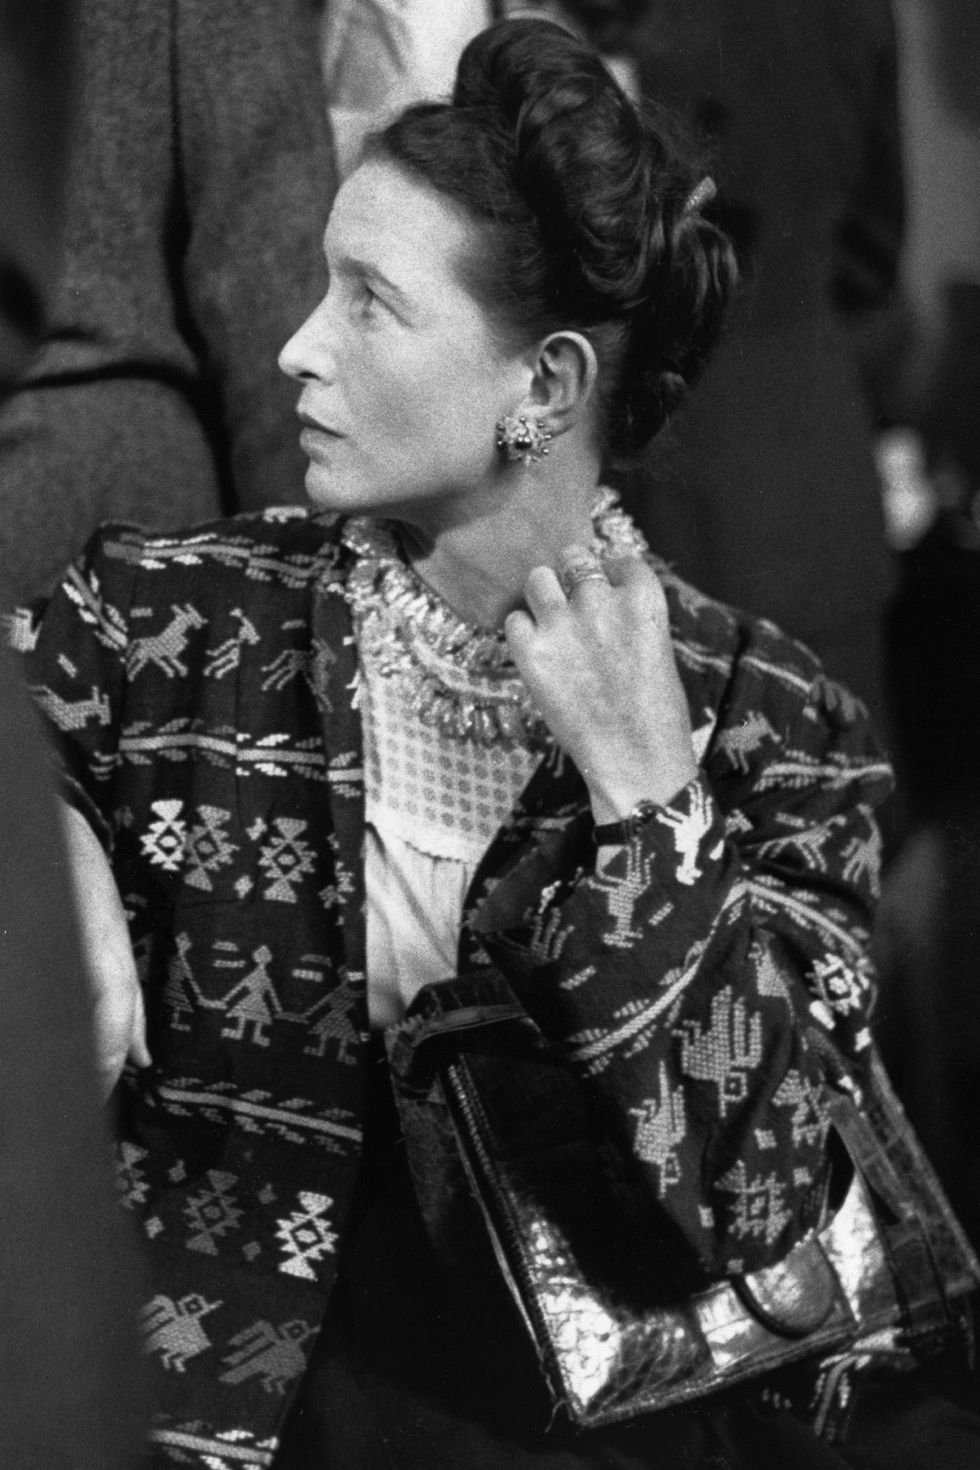 <p>Author, existentialist and feminist, Simone de Beauvoir wrote novels, biographies and essays. Most well-known for <em>The Second Sex</em>, a social analysis of women's oppression, de Beauvoir's look contained a little bit of the unfiltered insouciance seen in the French fashion scene: jackets that were a bit too big, tattered purses and dresses verging on frumpy were paired with costume jewelry that resulted in an ironic form of ugly-chic in the best possible way.</p>